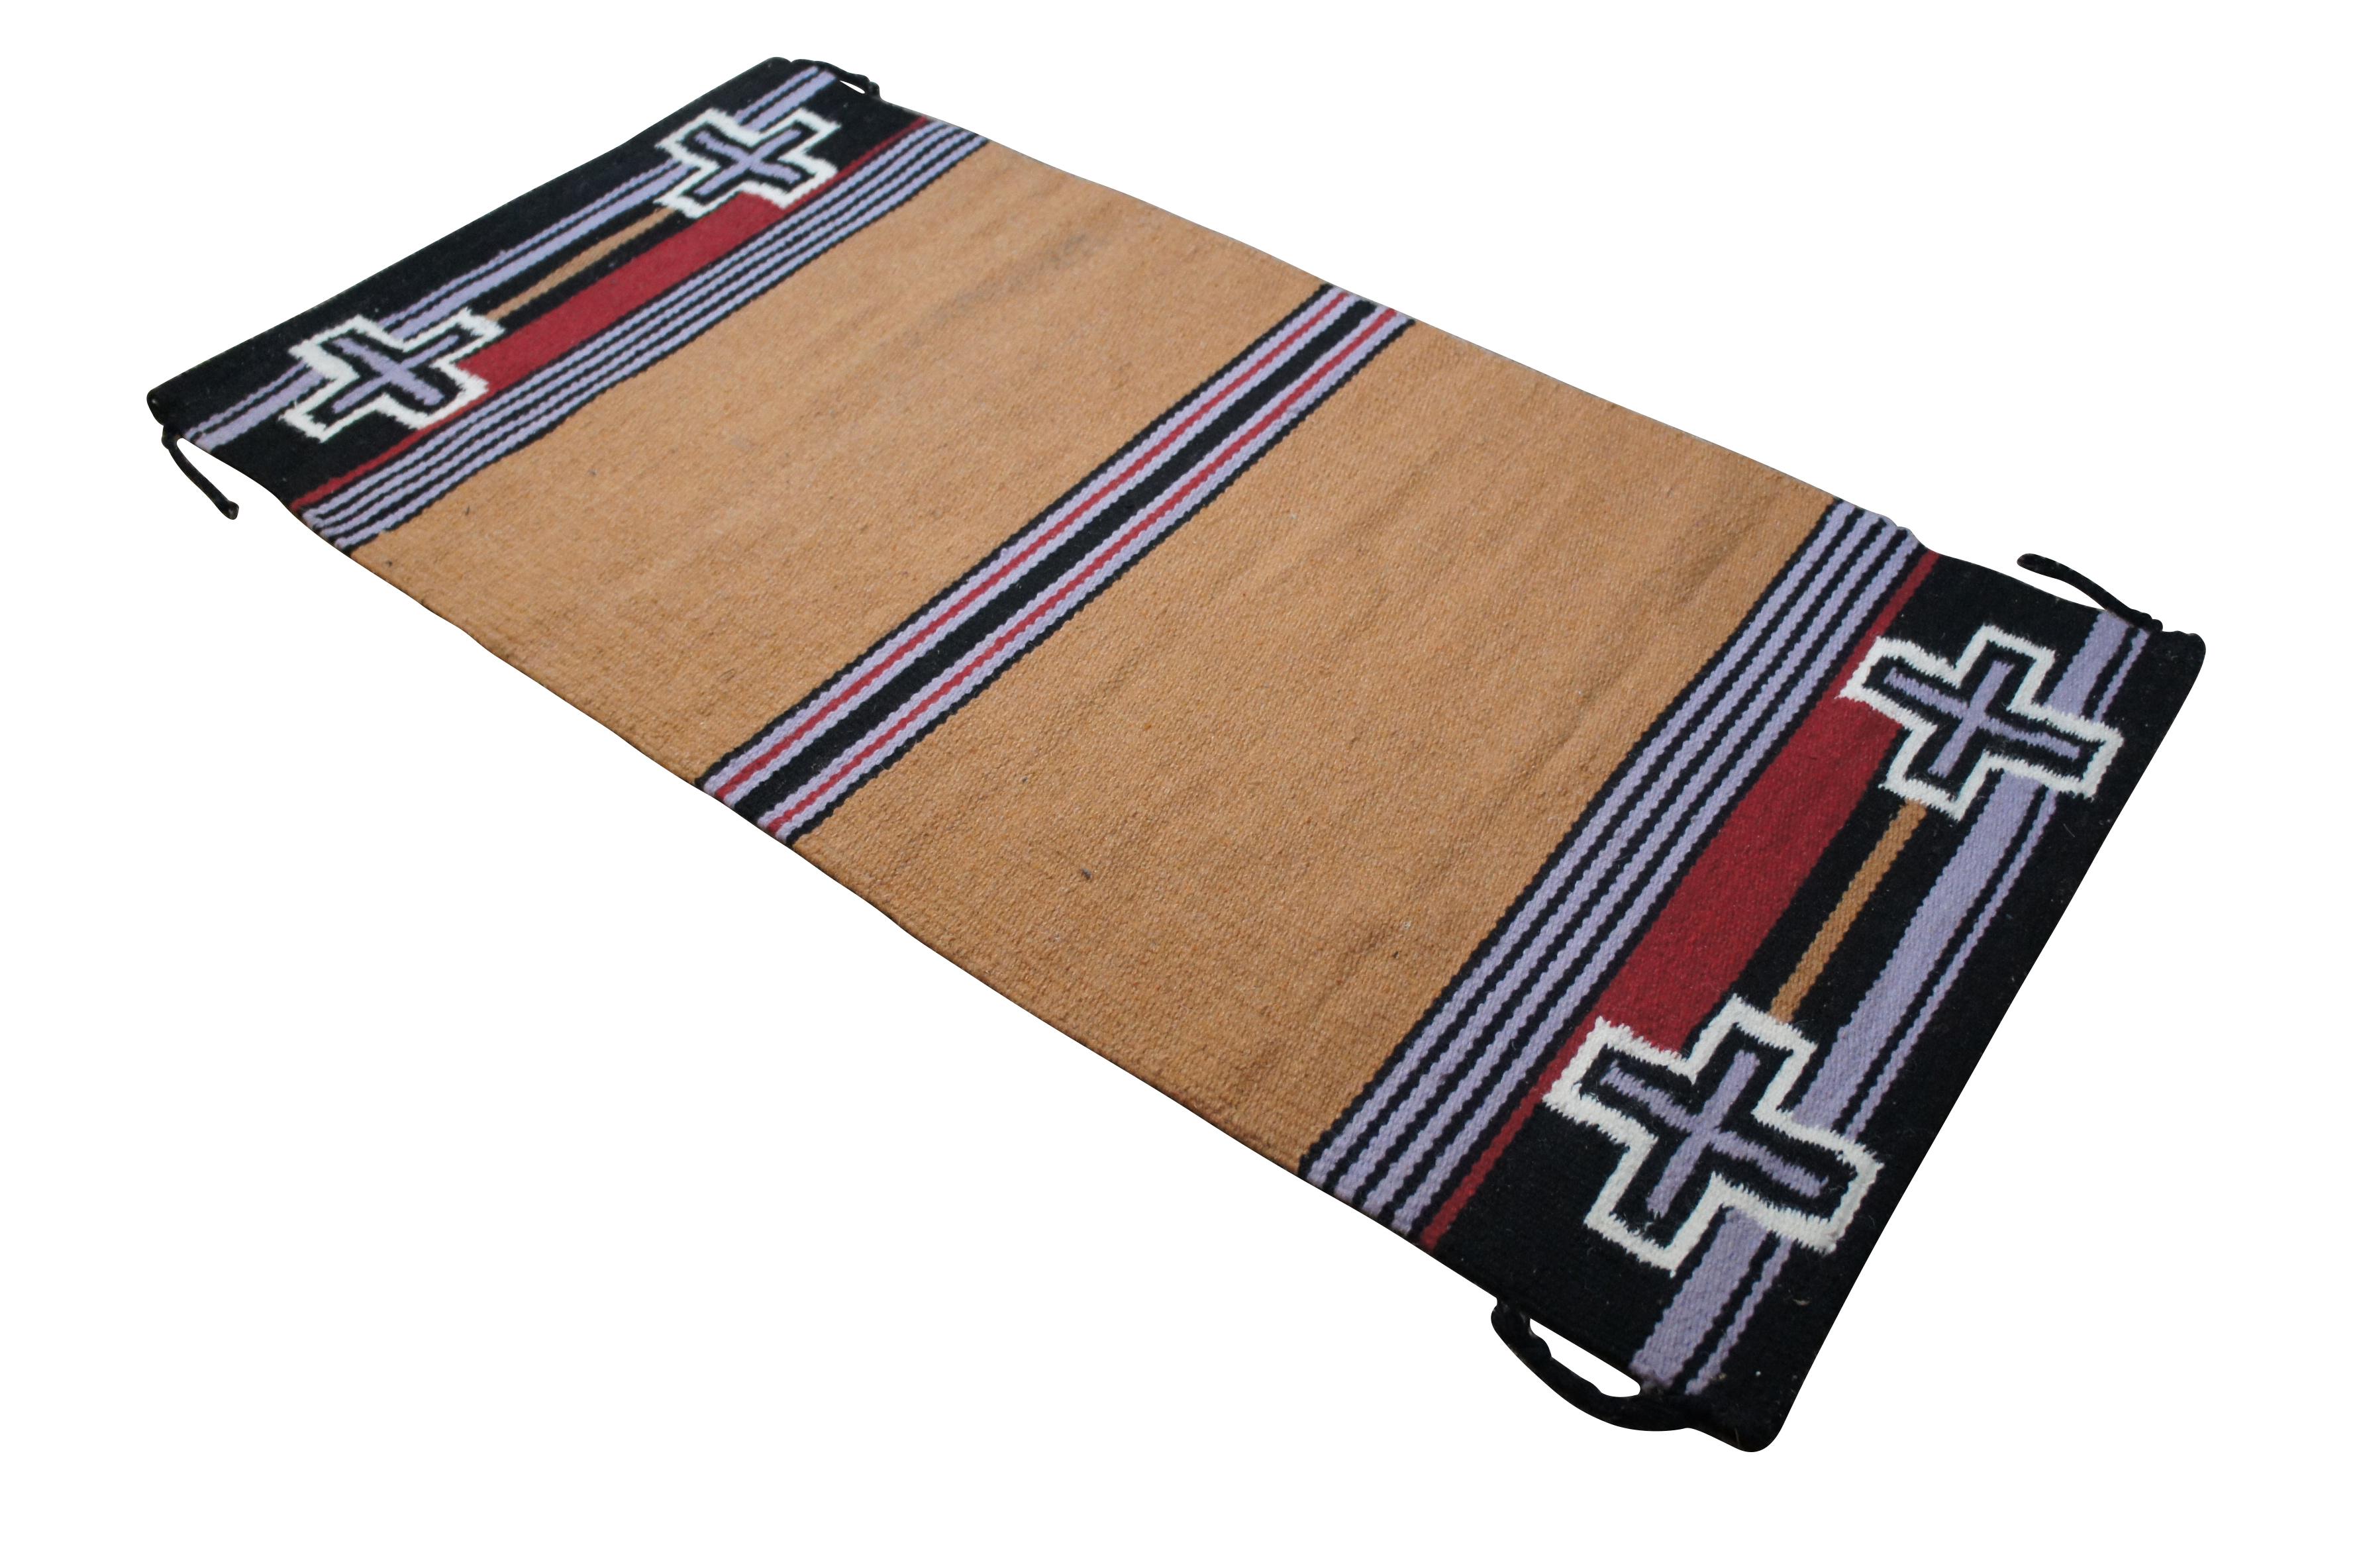 Vintage Native American / Navajo / Southwestern / Western / style hand woven wool saddle blanket / area rug / mat. Camel brown with stripes of black, red, white, and light purple, ends embellished with four crosses.

Dimensions:
65